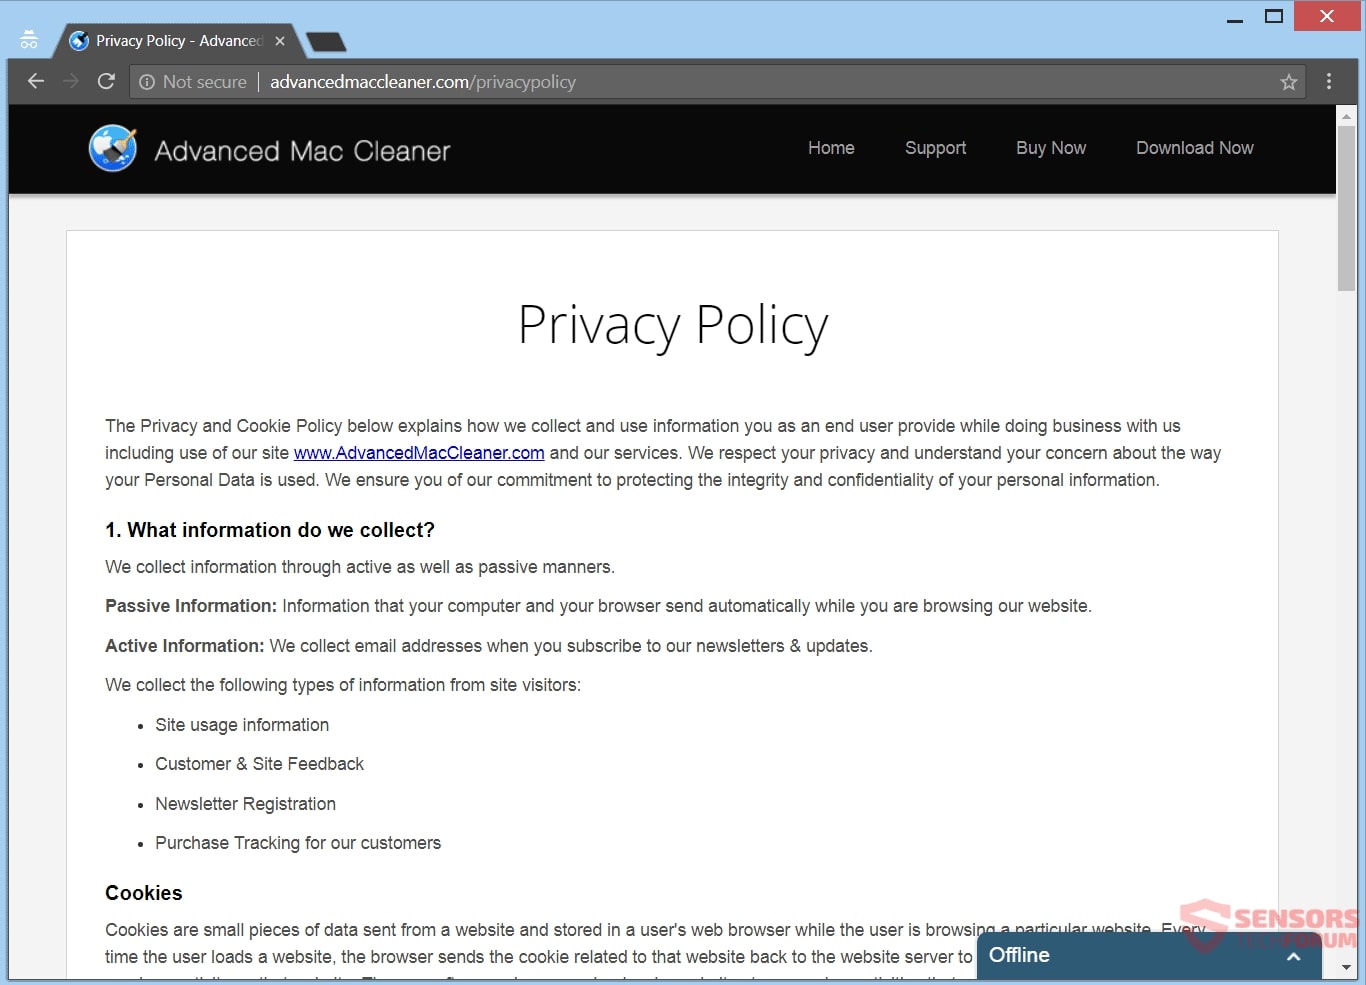 stf-advanced-mac-cleaner-pup-sito-ufficiale-privacy-policy-page